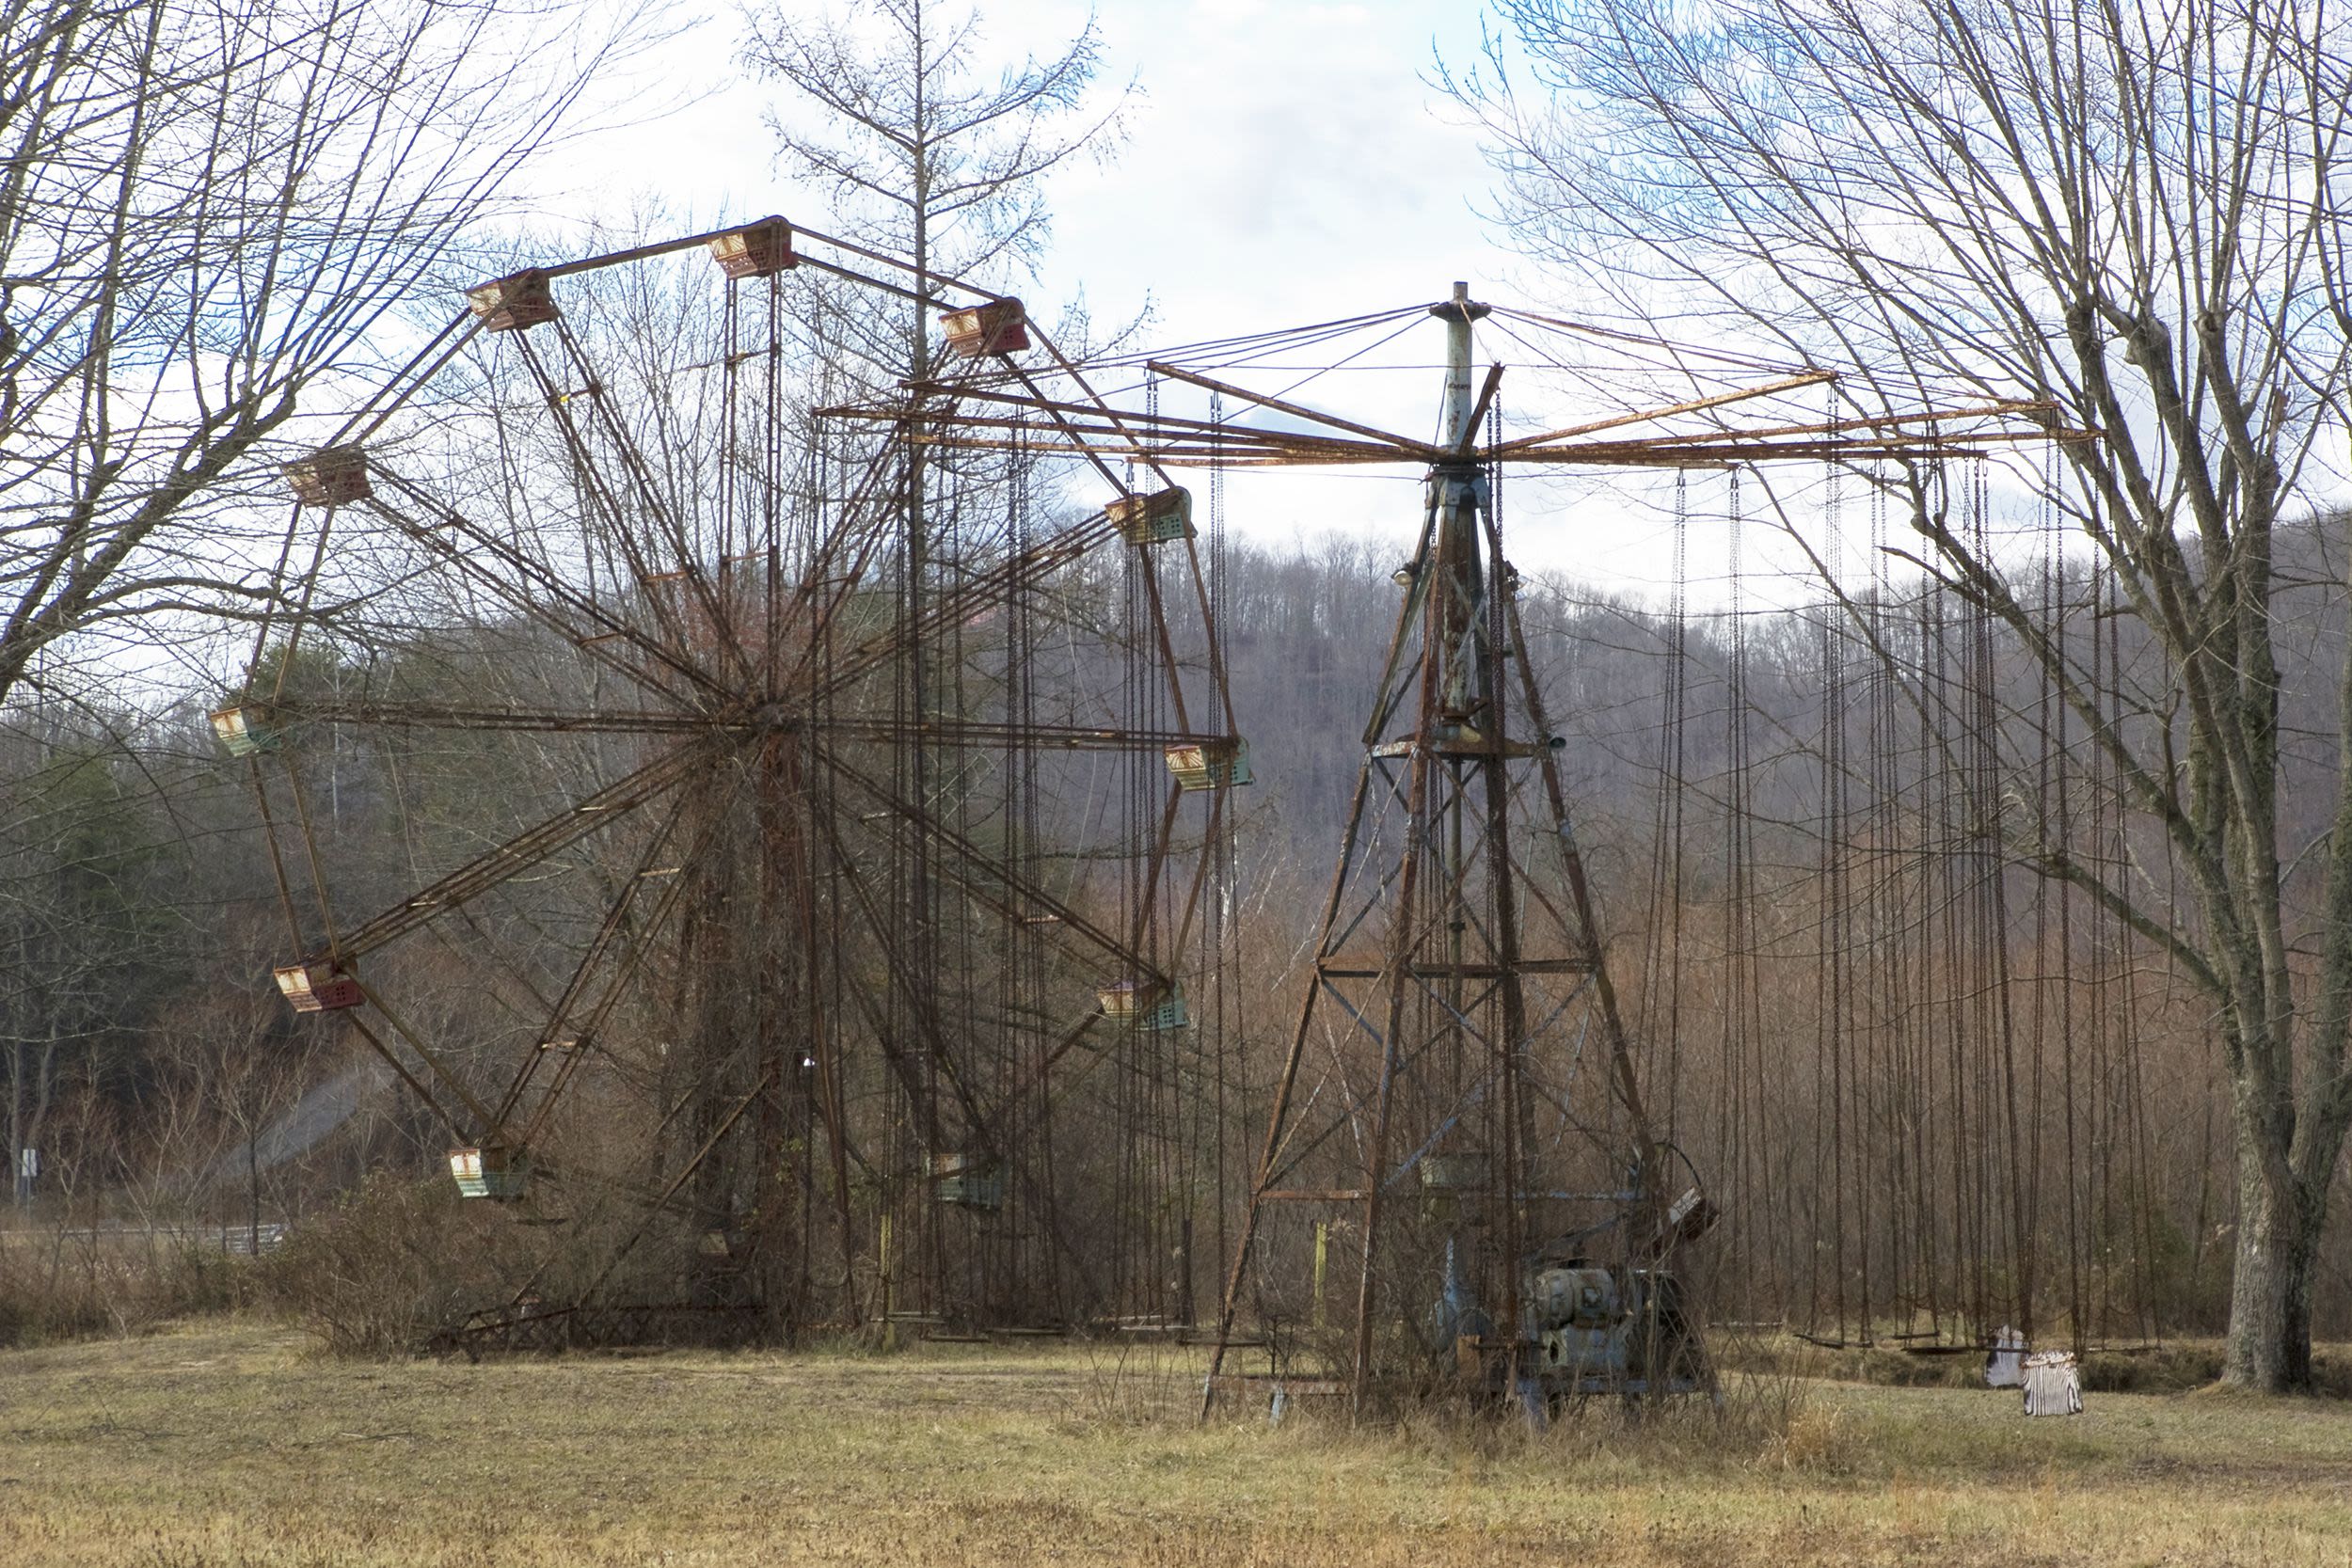 Creepy Abandoned Amusement Parks That'll Give You Chills